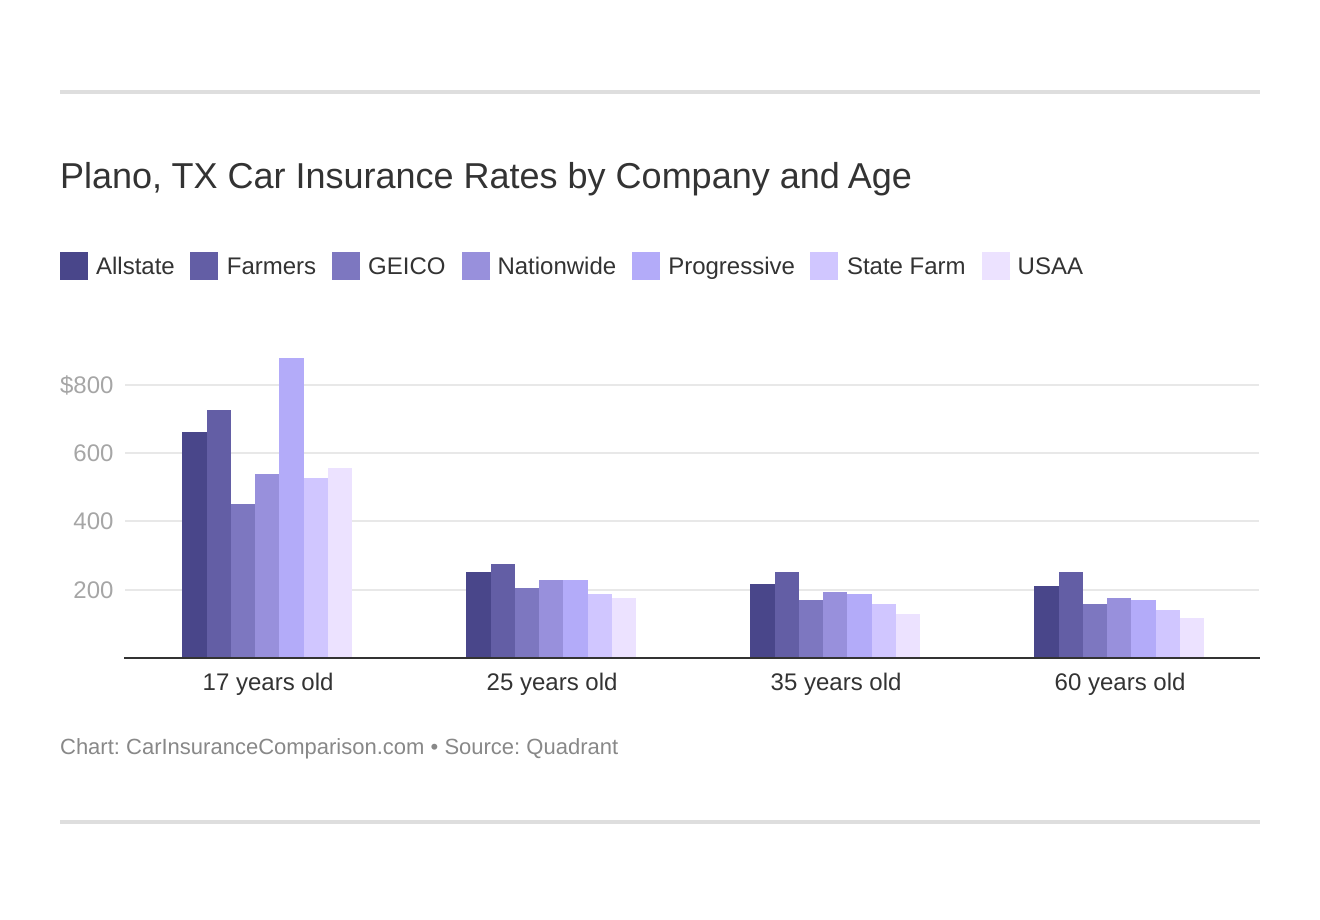 Plano, TX Car Insurance Rates by Company and Age